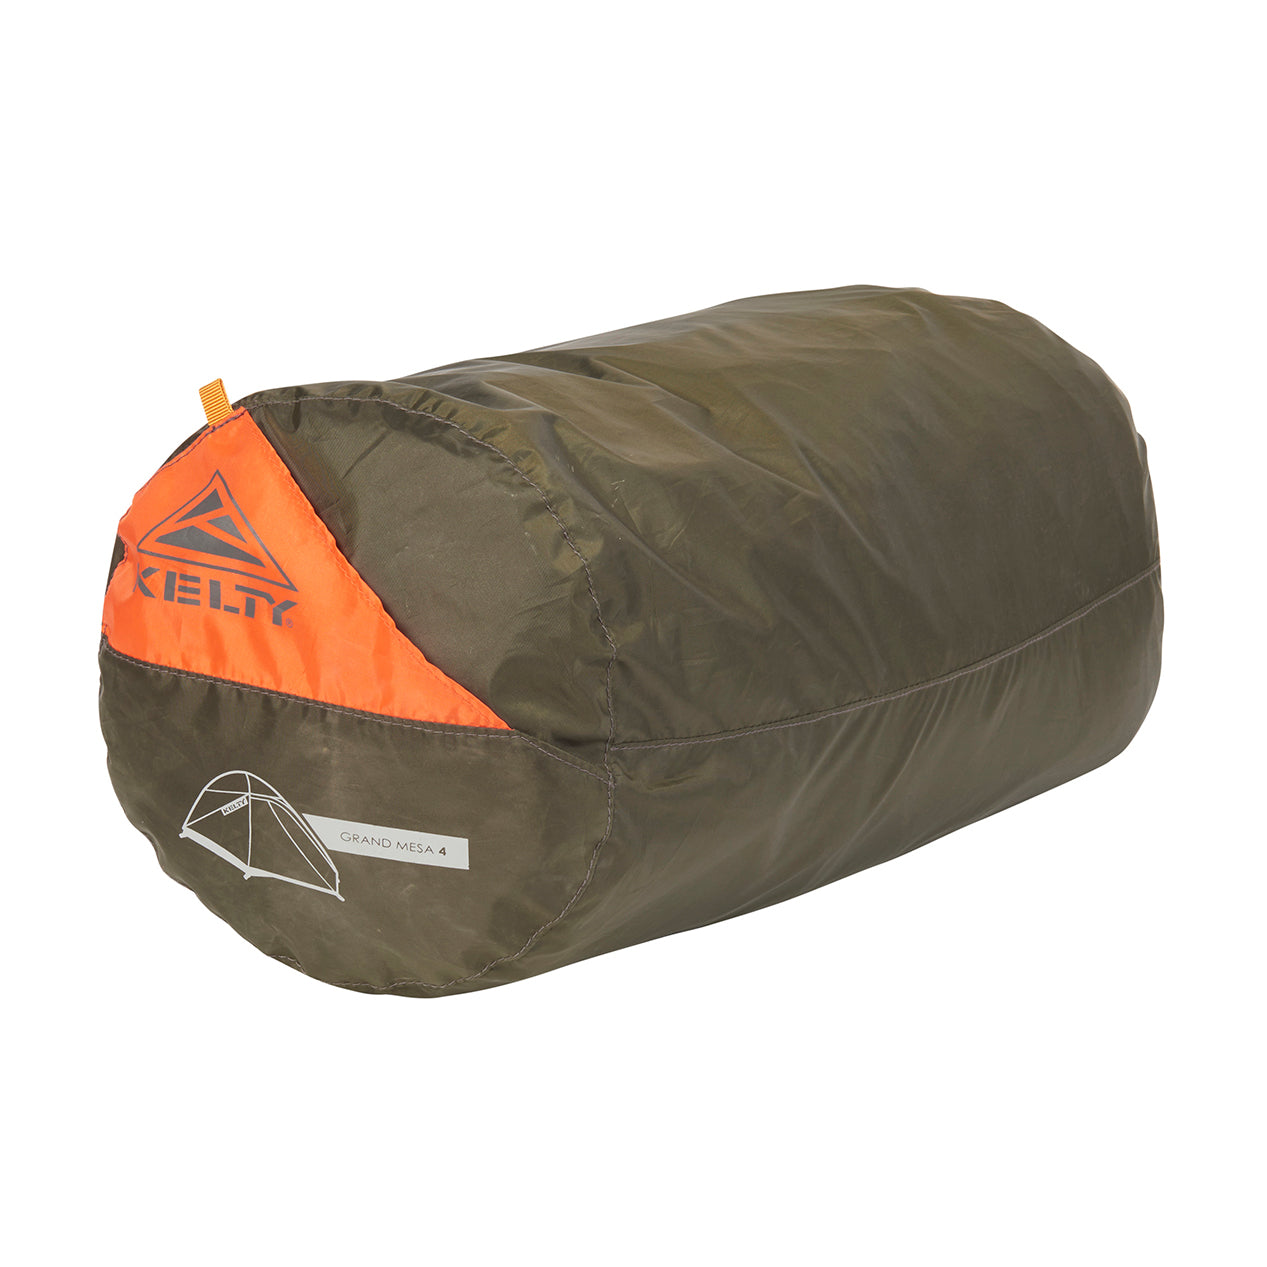 kelty grand mesa 4 person tent in stuff sack 